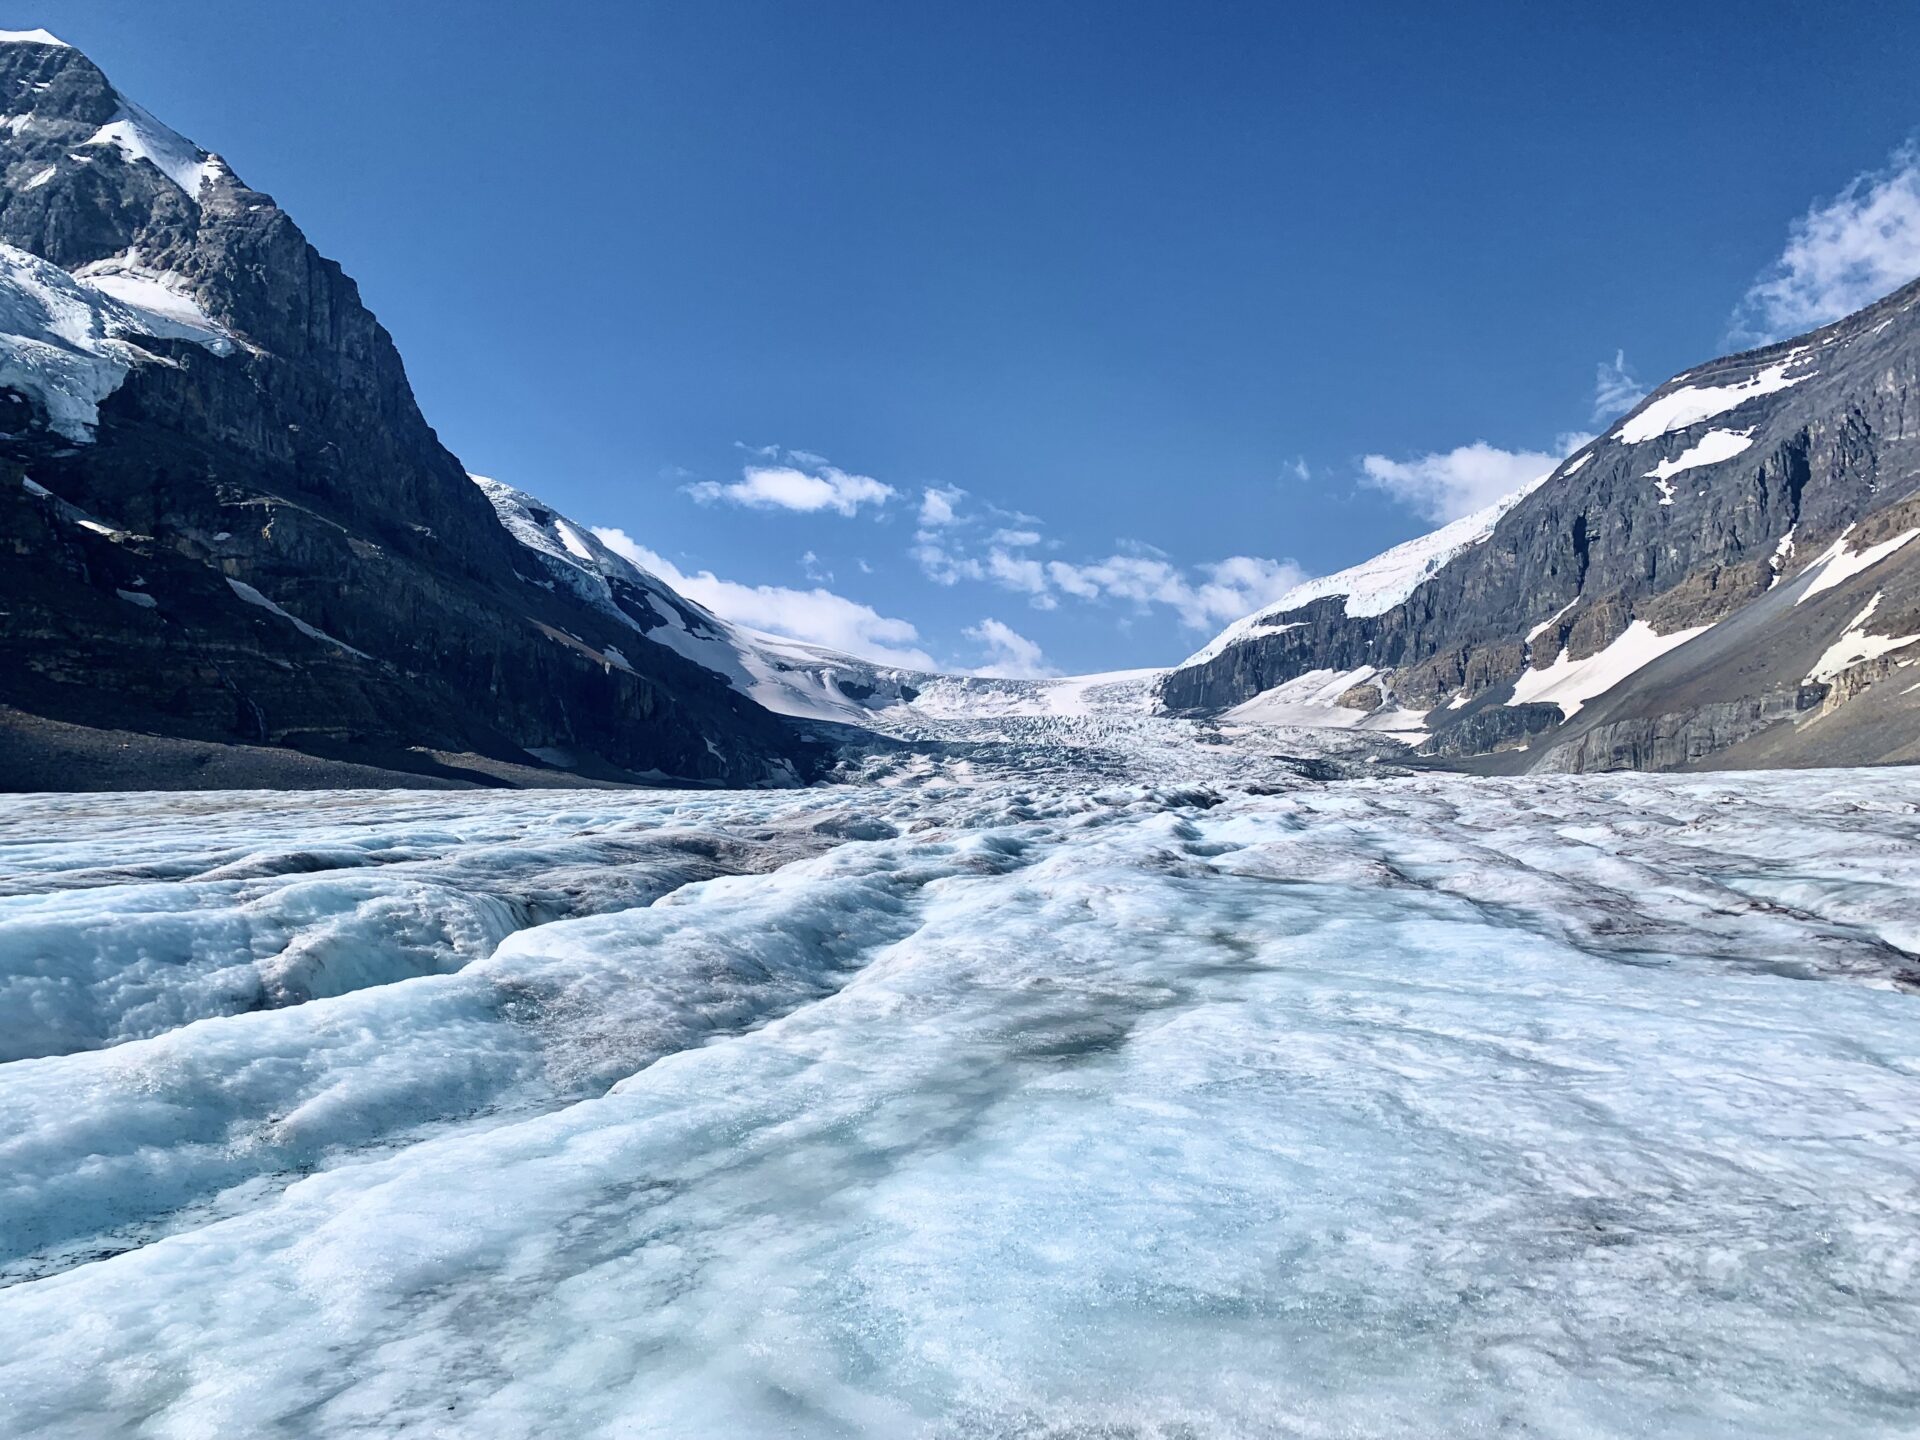 Athabasca Glacier, Icefields Parkway